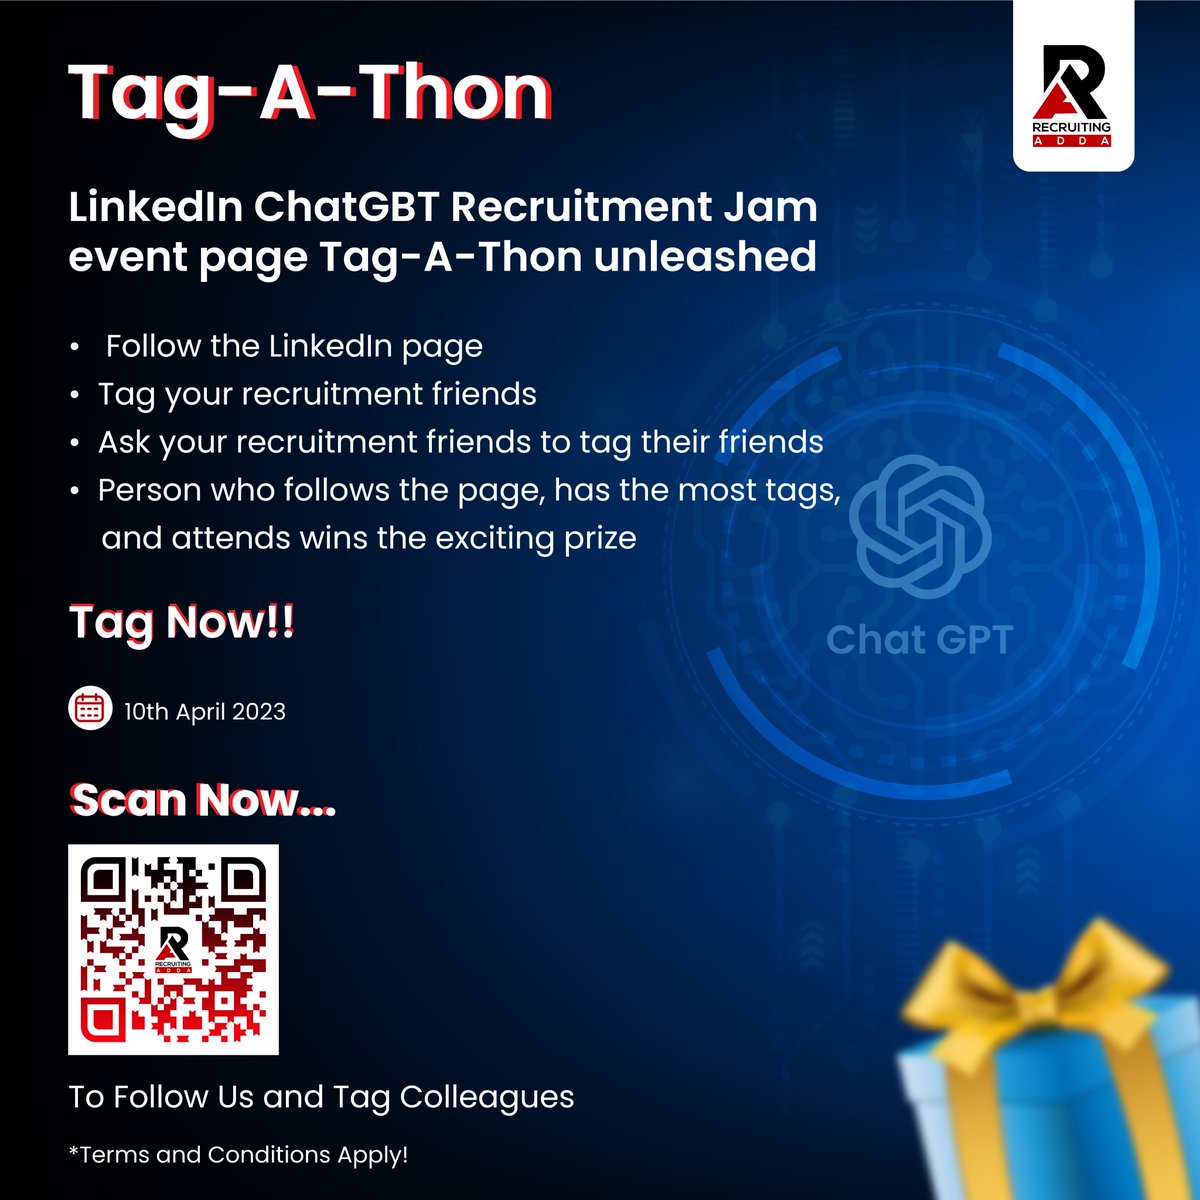 Fun & learning with ChatGPT recruitment jam by Recruiting ADDA,
A Tag-A-Thon contest to follow us & create most tags to the LinkedIn event page & attend.
Follow & Tag us now: bit.ly/3zFHfcl
 
#tagathon #chatgpt #RAChatGPTWebinar #recruitingadda #sourcingadda #recruitment